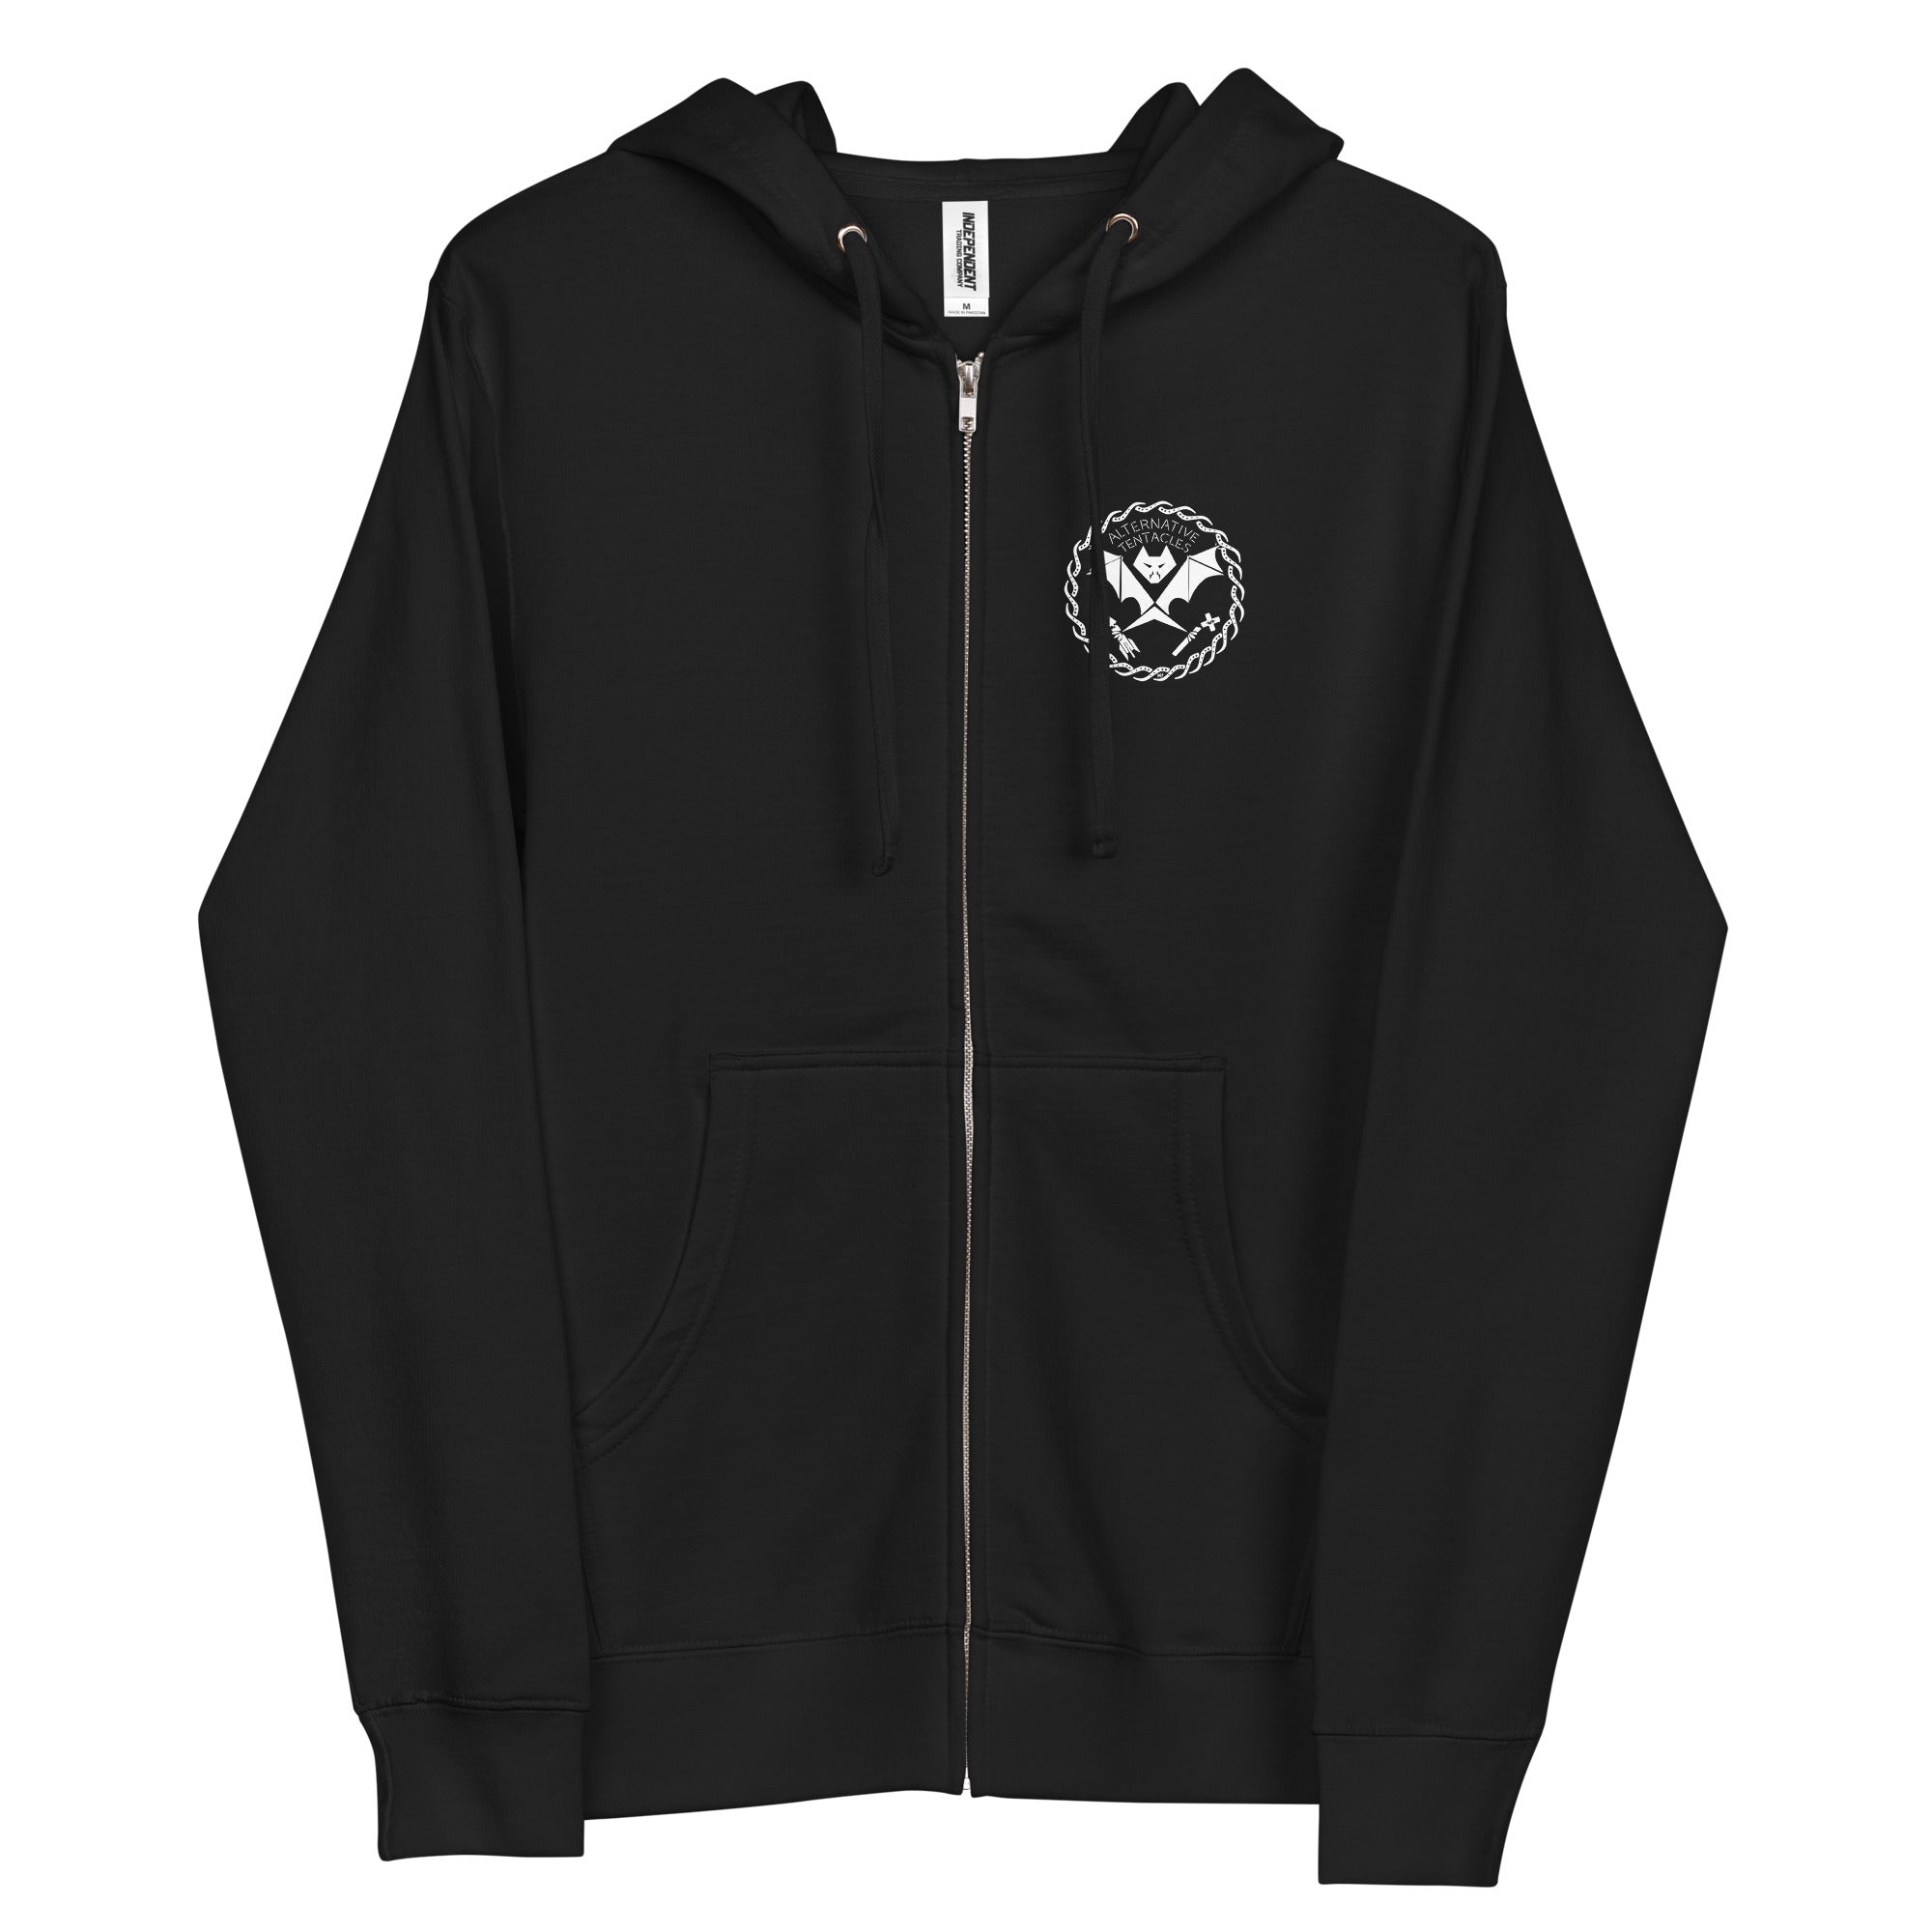 "New Frontiers Of Sick And Wrong Since 1979" feat. THE DARTS Unisex Zip Up Hoodie